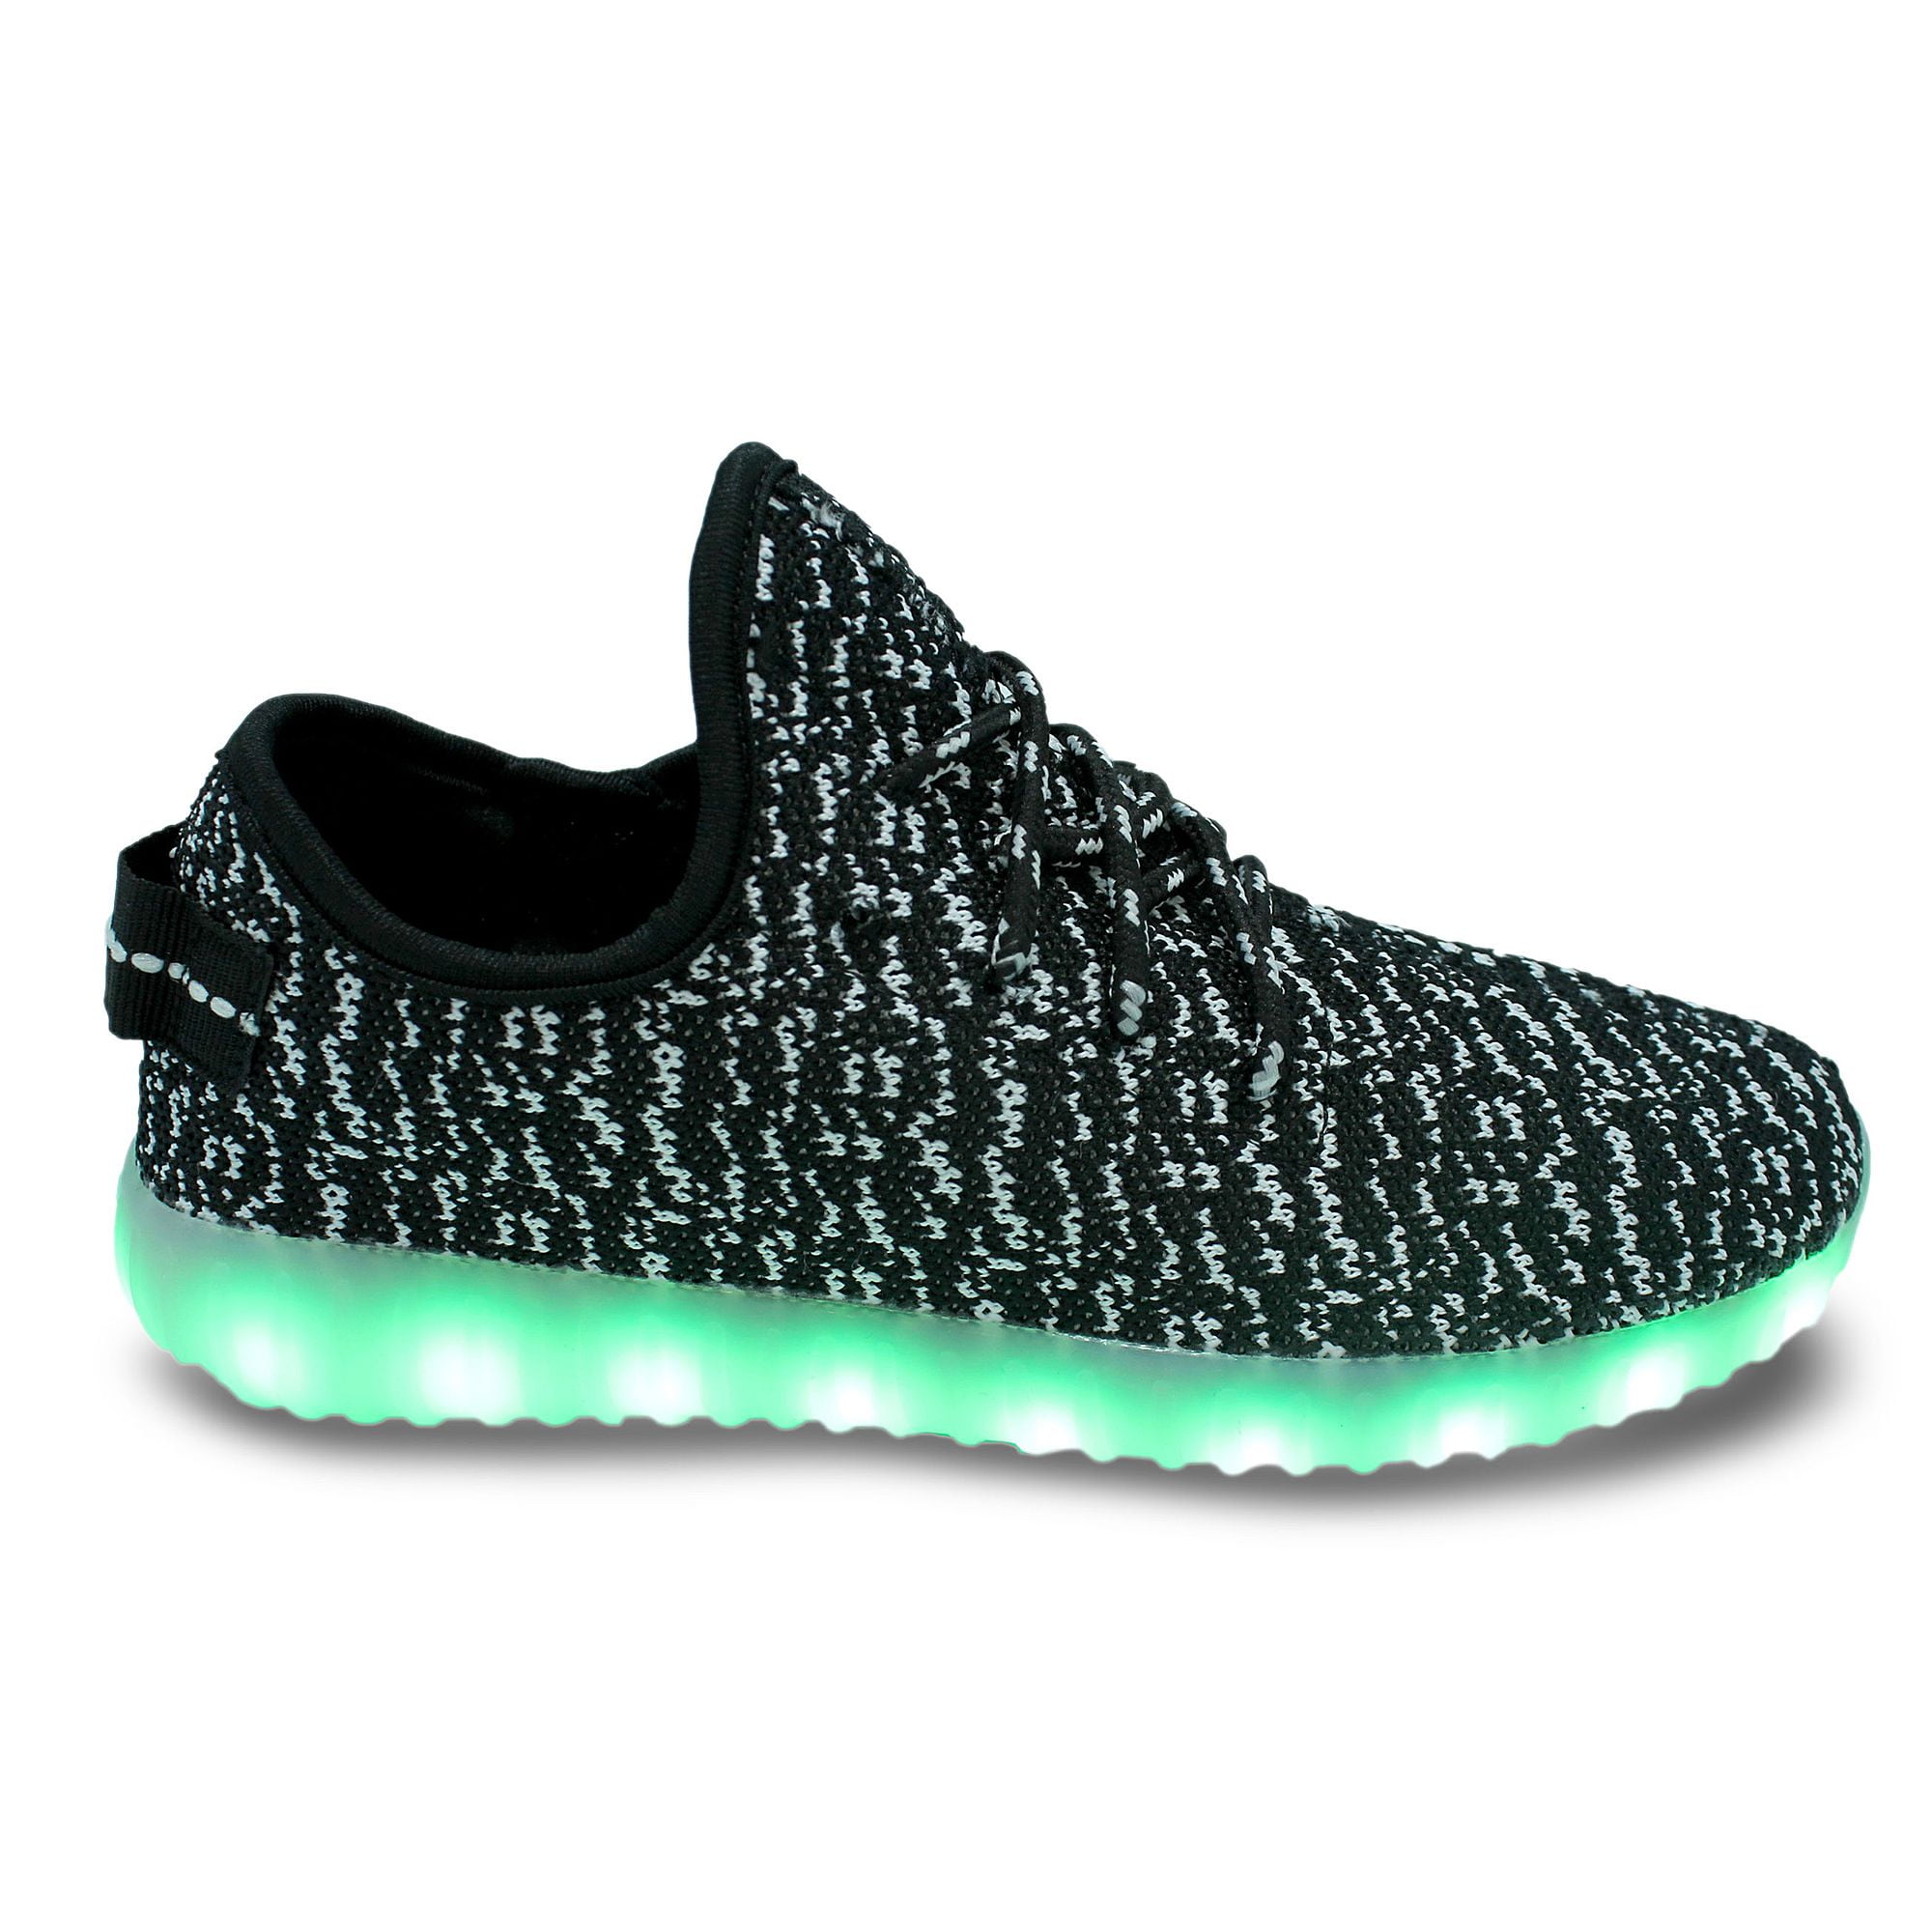 Family Smiles LED Light Up Knit Sneakers Low Top USB Charging Women Shoes  Black / White - Walmart.com